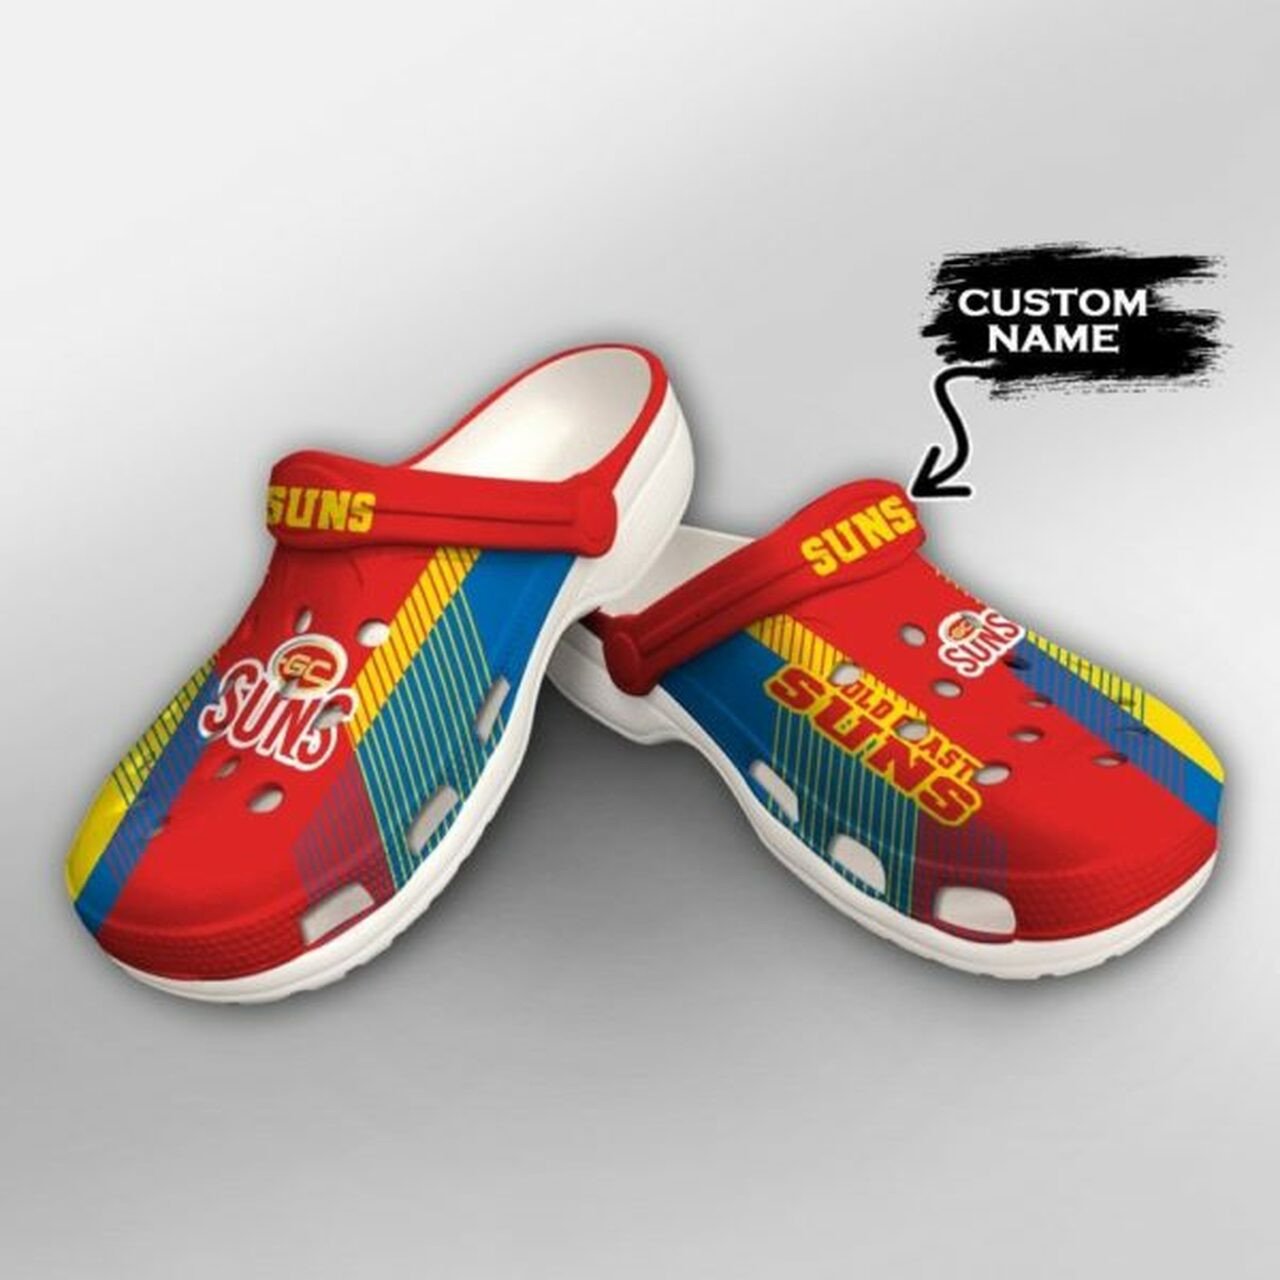 Gold Coast Suns Hot Color Custom Name Crocss Crocband Clog Comfortable Water Shoes